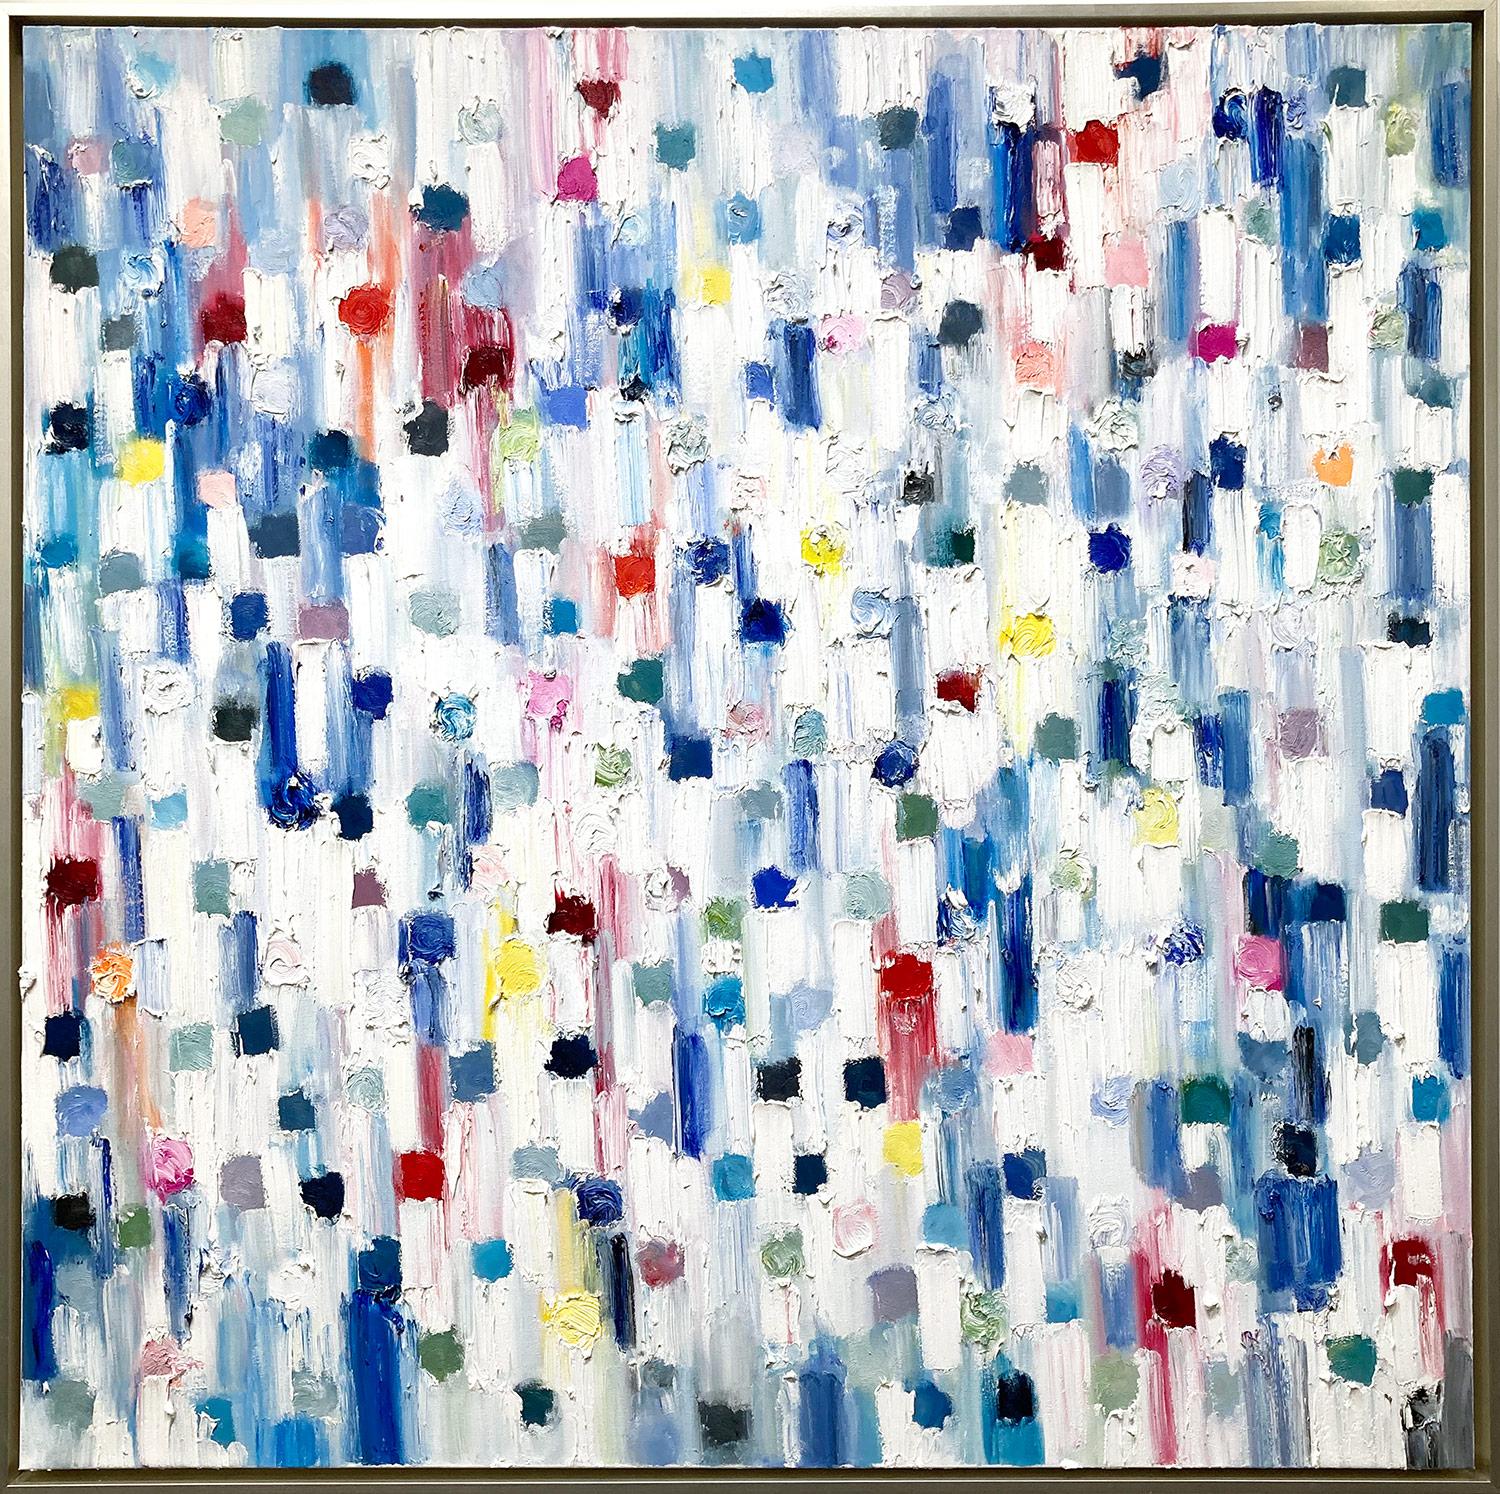 Cindy Shaoul Abstract Painting - "Dripping Dots -  St. Barth's" Colorful Abstract Oil Painting on Canvas Framed